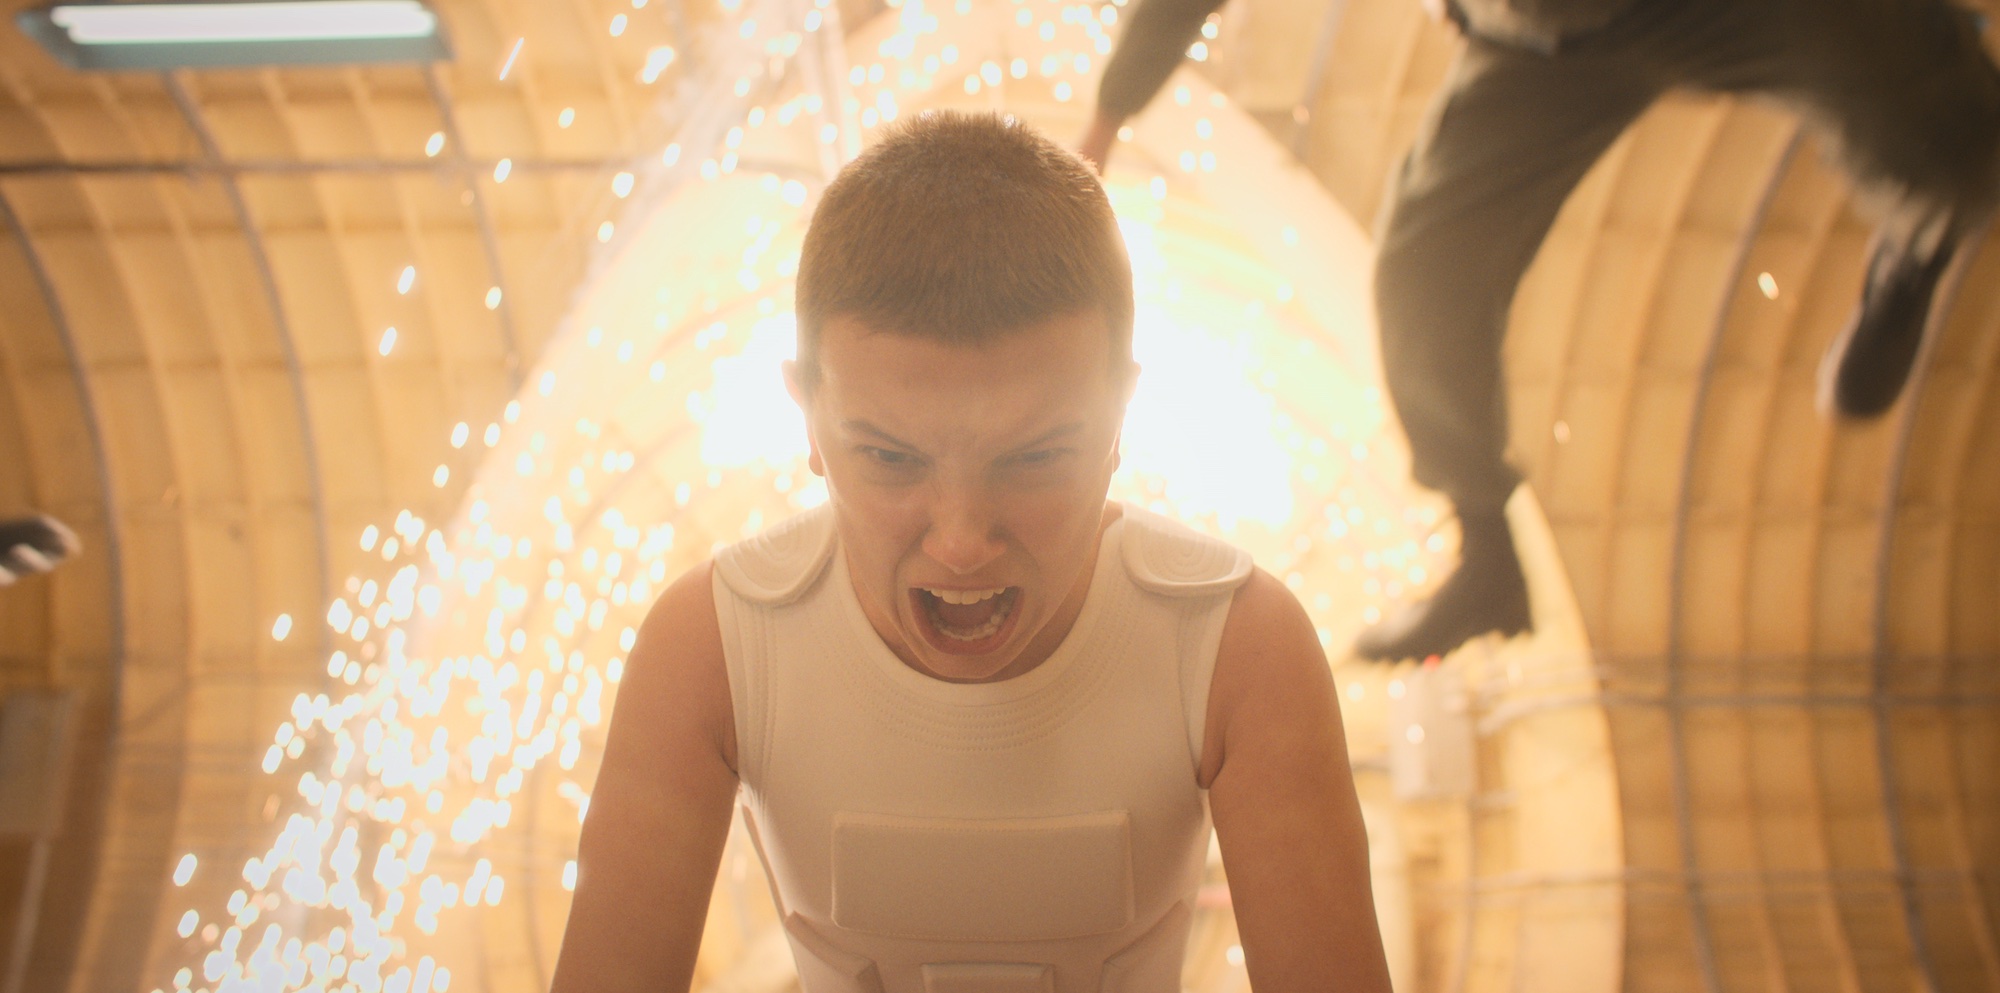 'Stranger Things 4' star Millie Bobby Brown using her powers in a production still from the upcoming season.